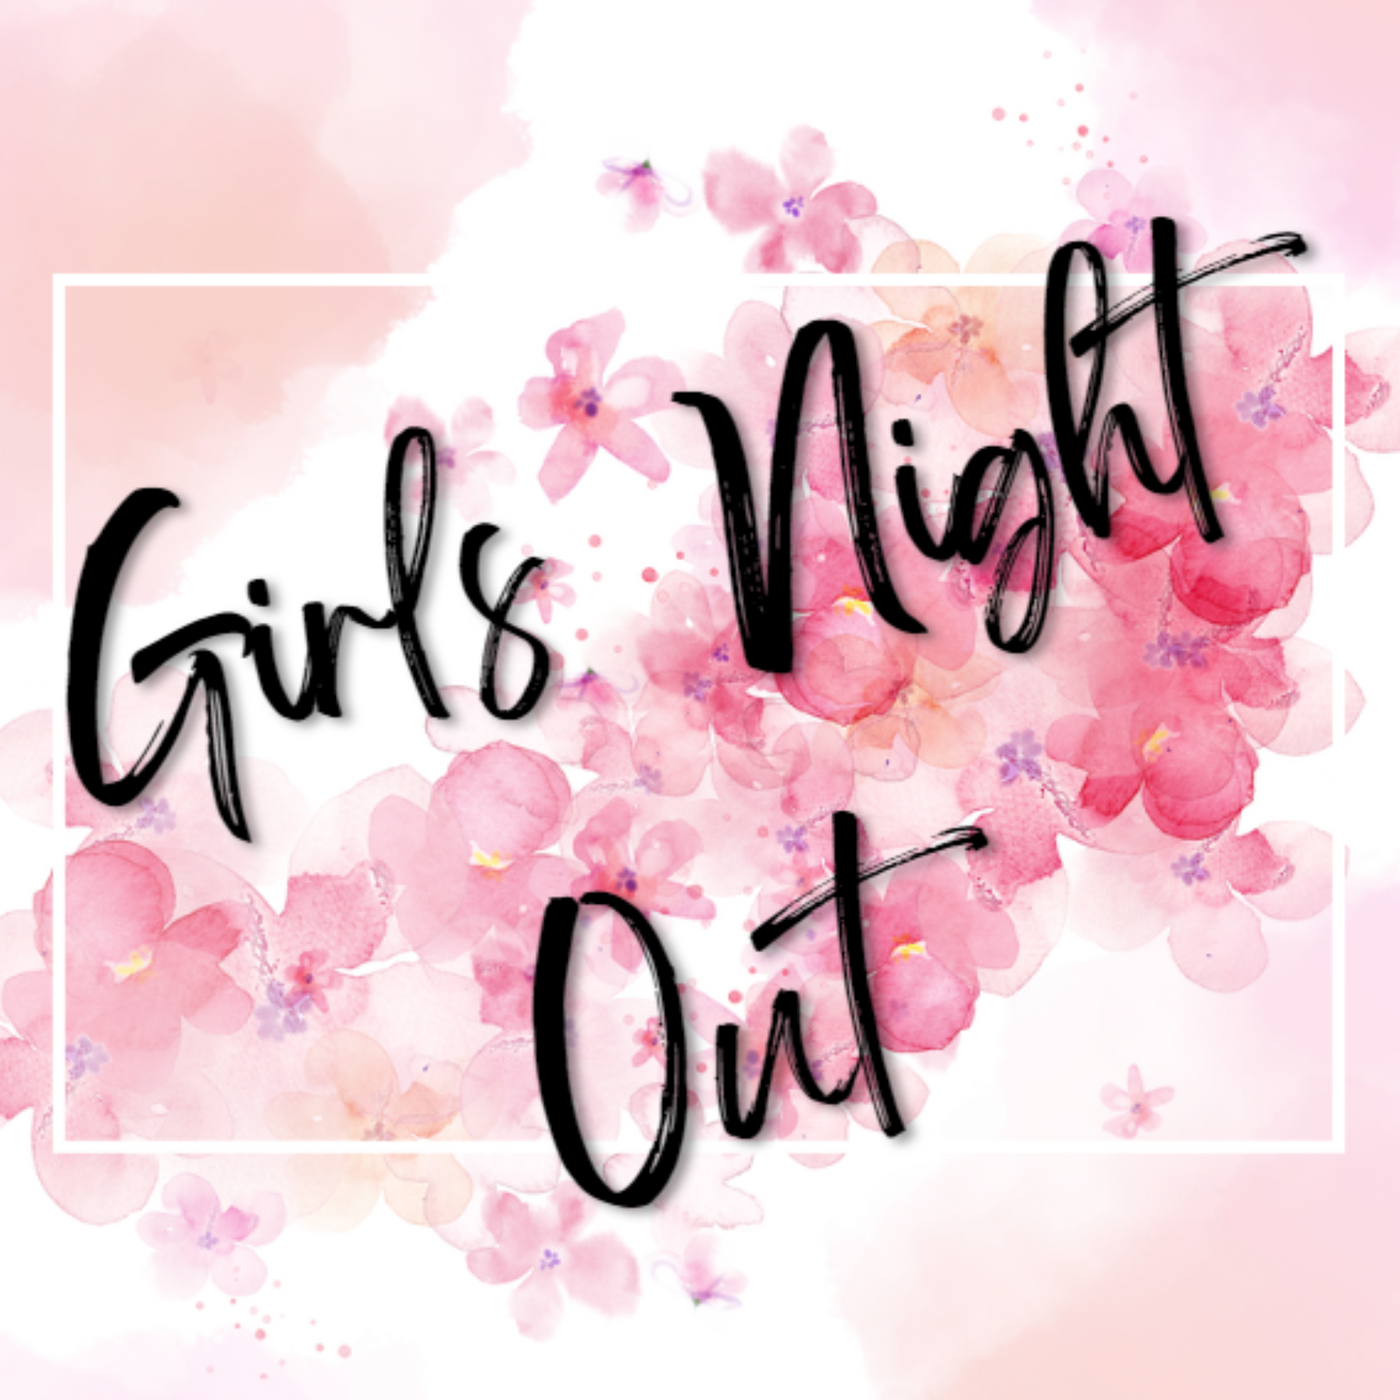 Girl's Night Out - March 23 - Shopping Pass